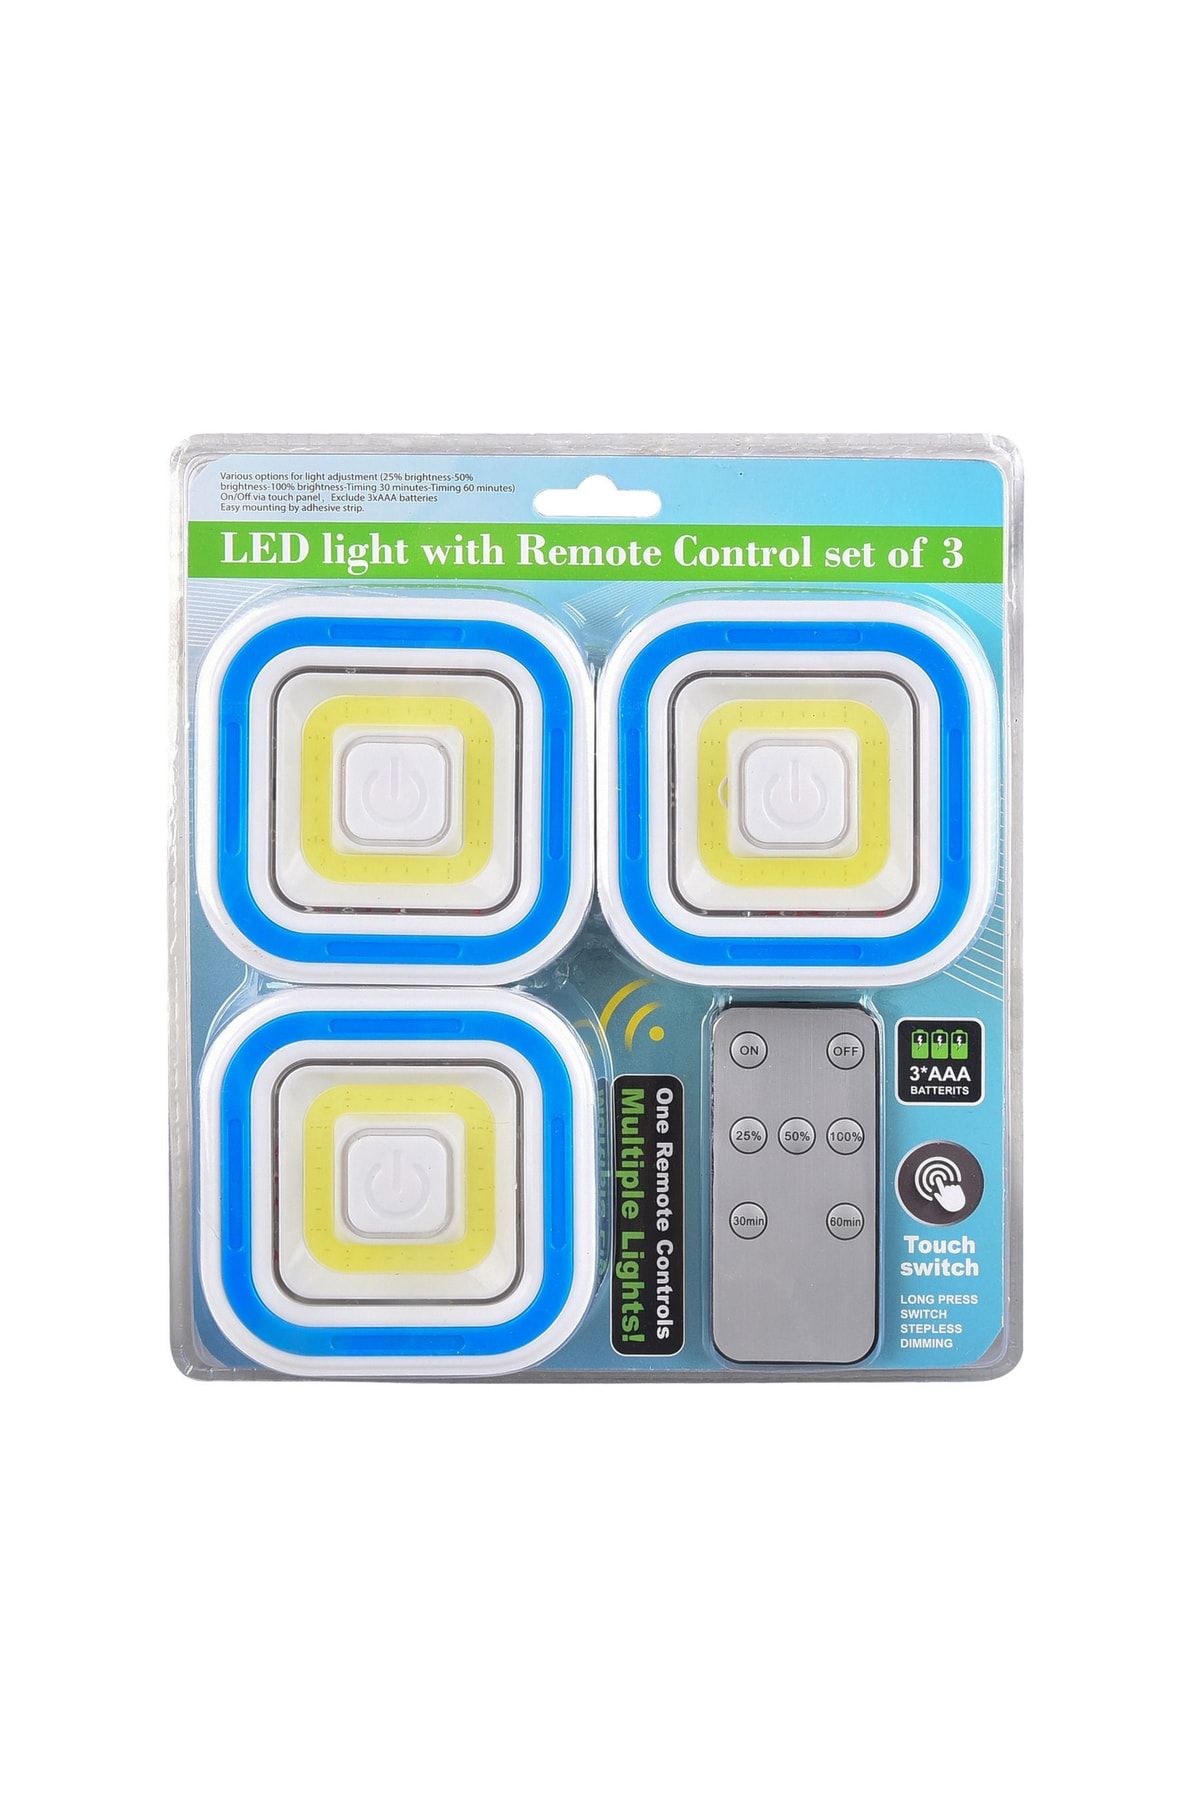 Pamiravm Led Light With Remote Control Set Of 3